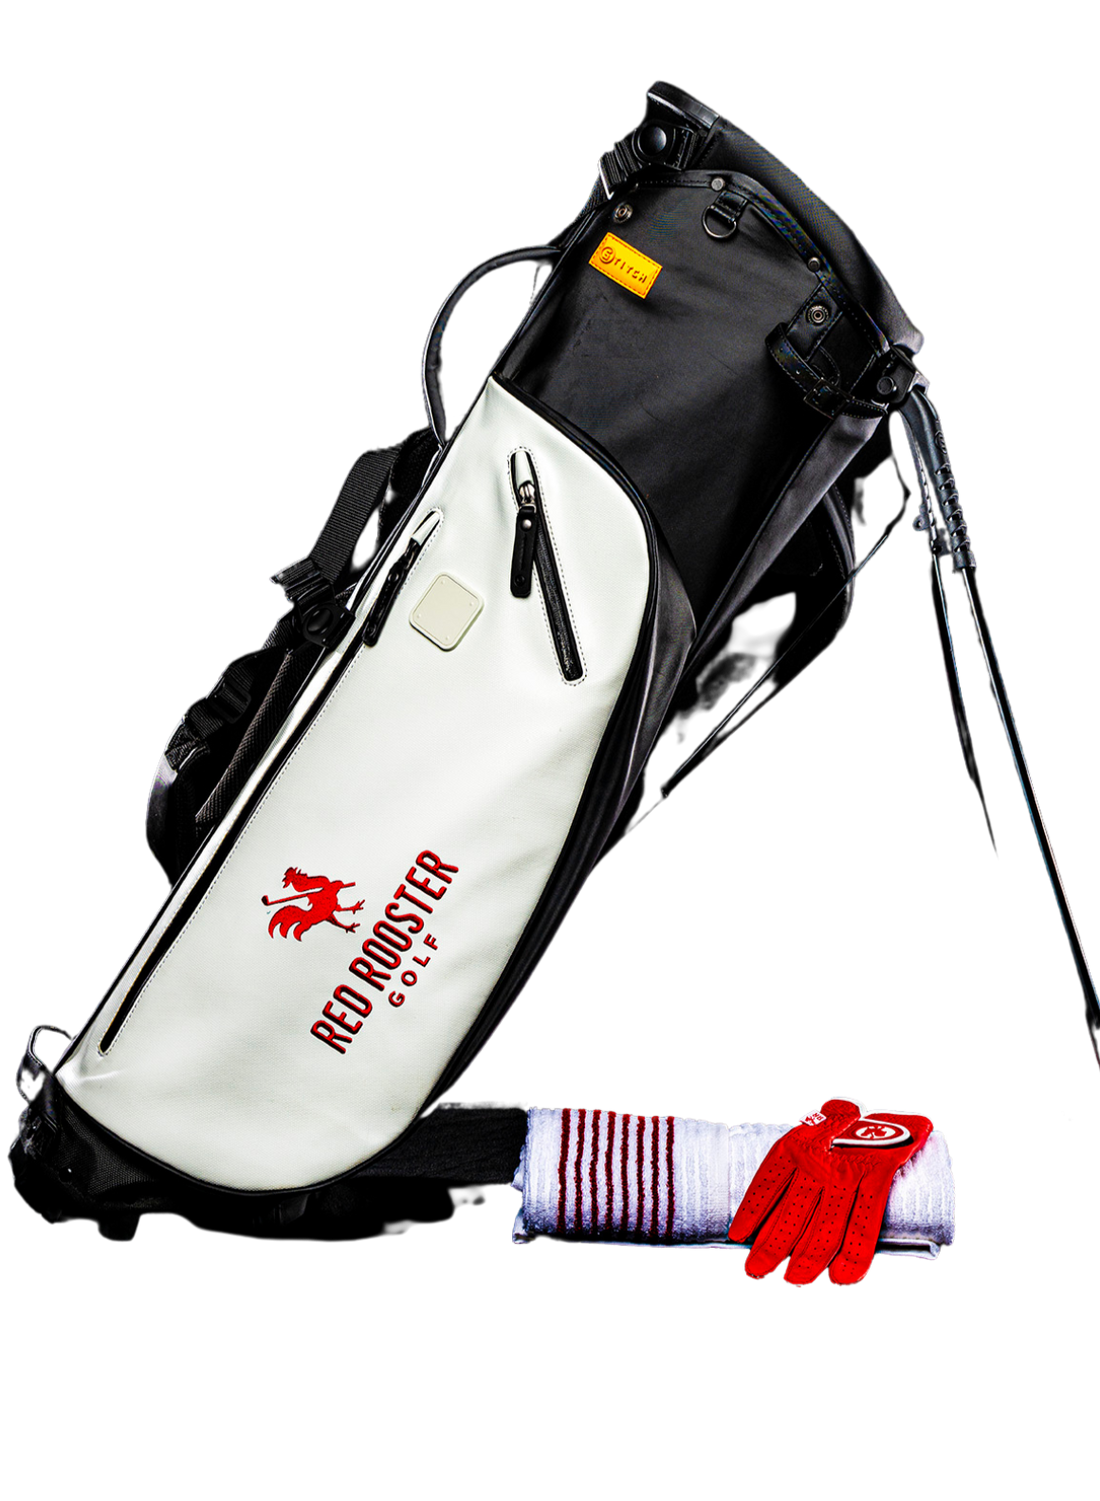 Red Rooster/Stitch SL2 Golf Bag